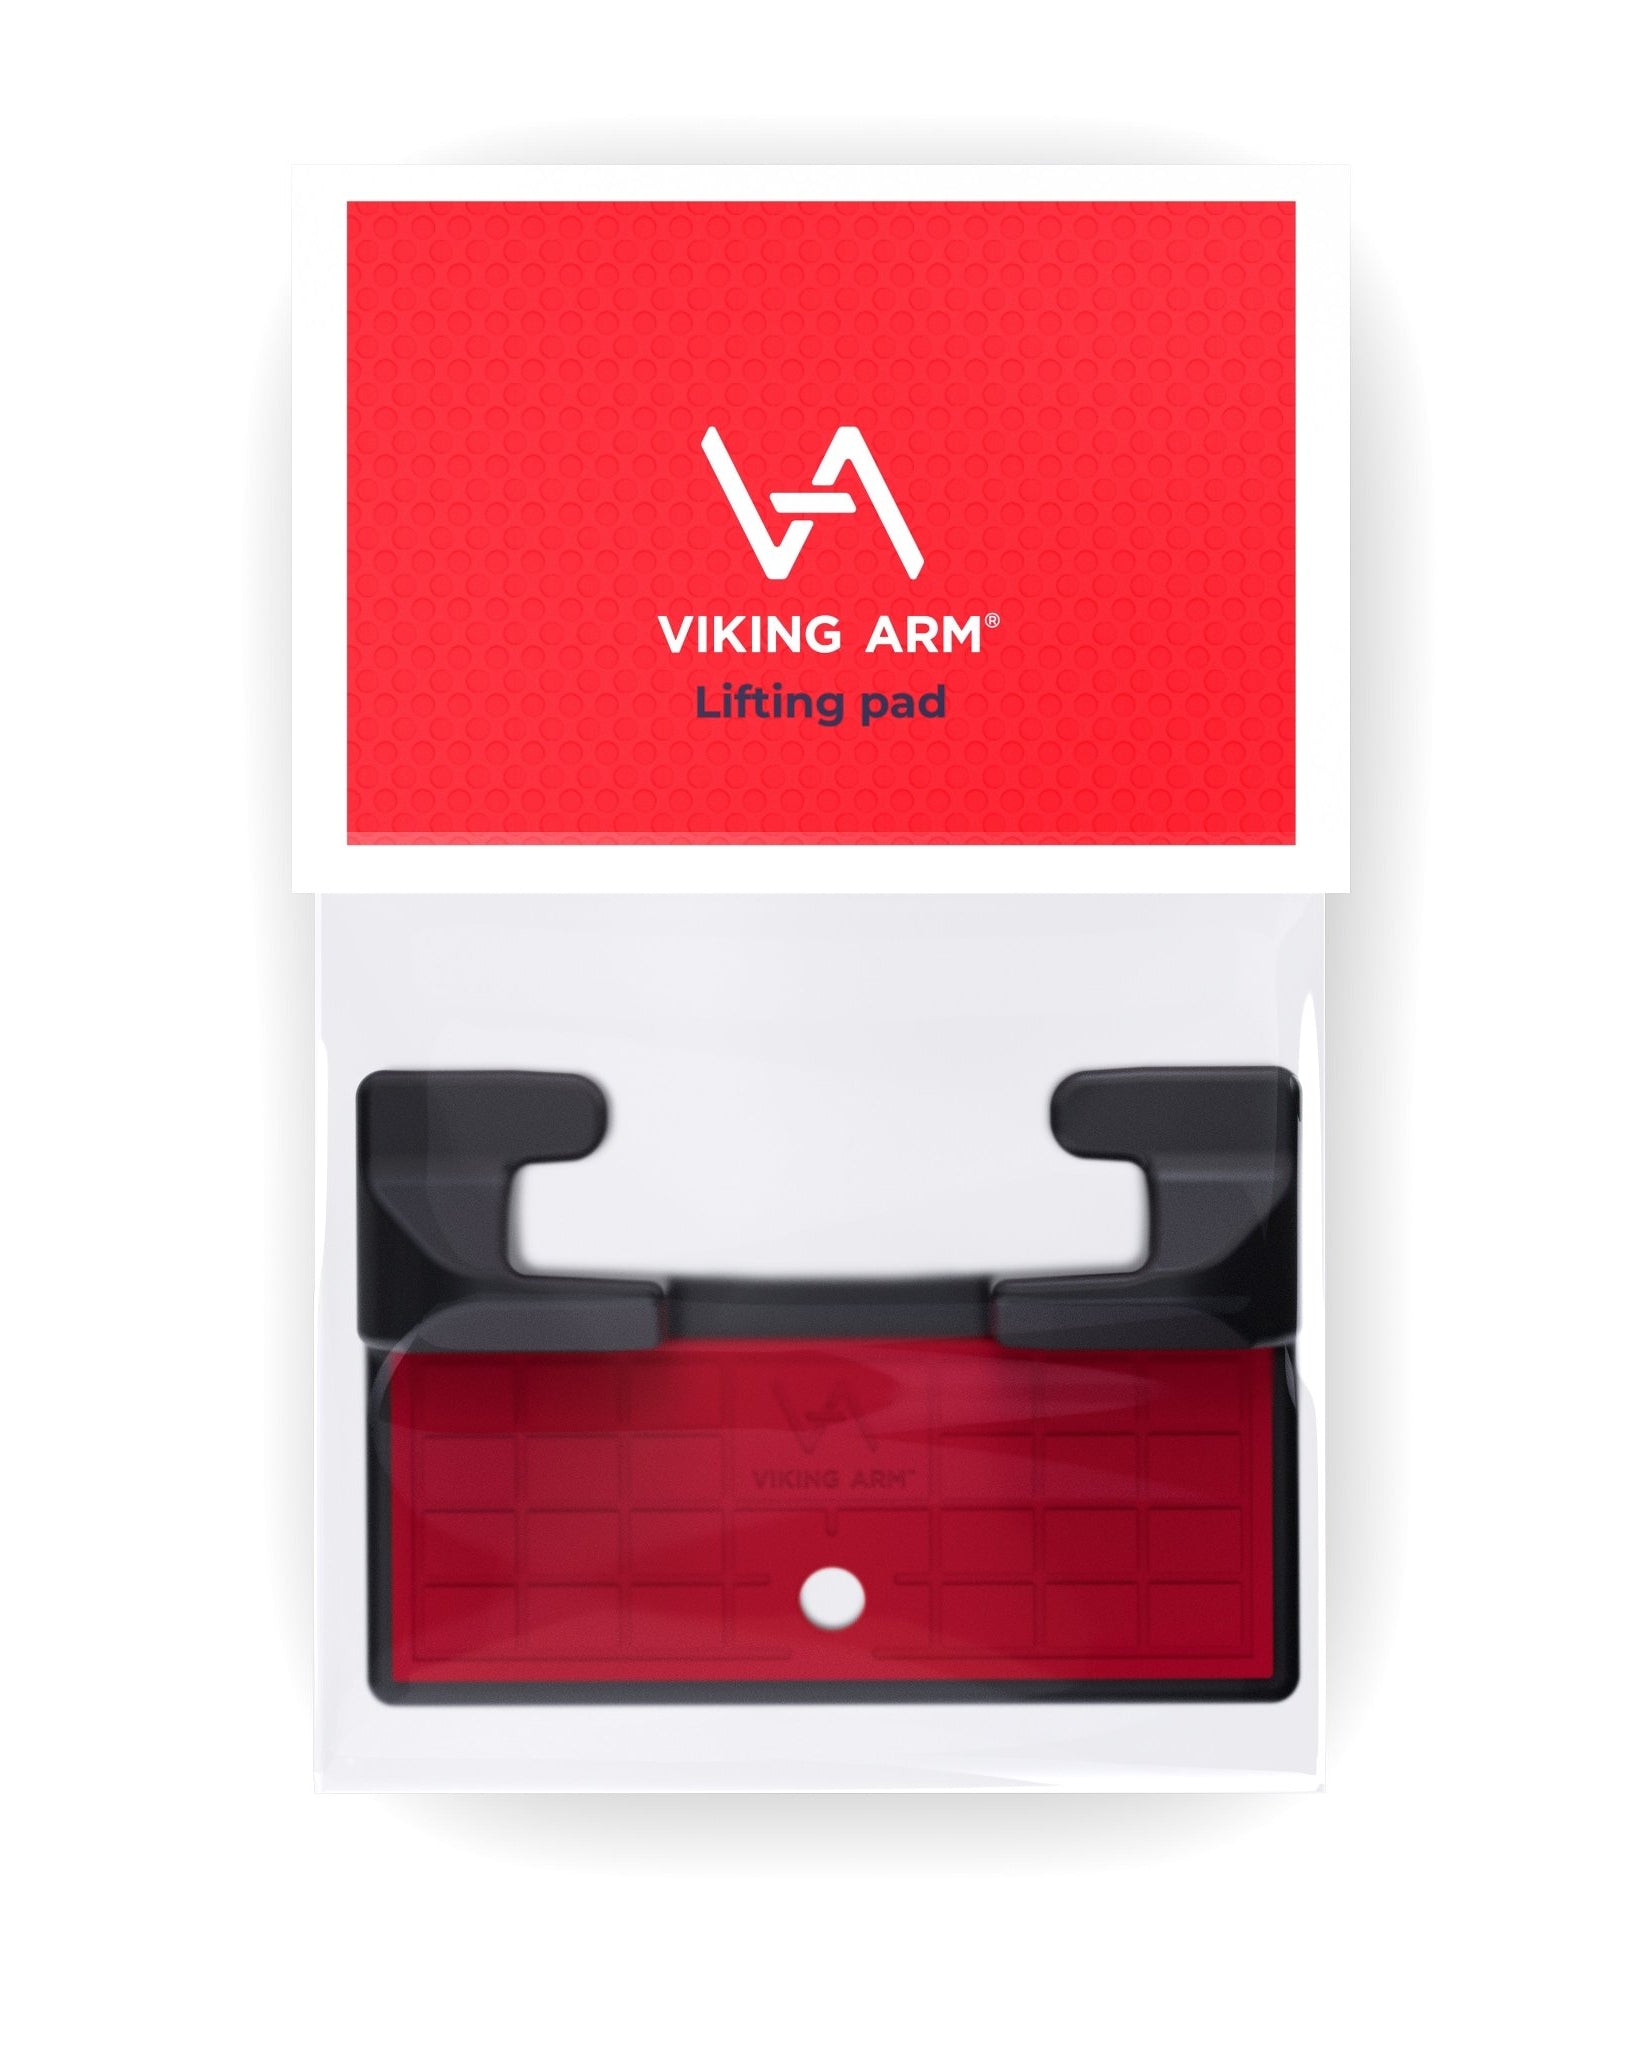 Massca Products | Viking Arm Lifting Pad | Woodworking | Massca Products